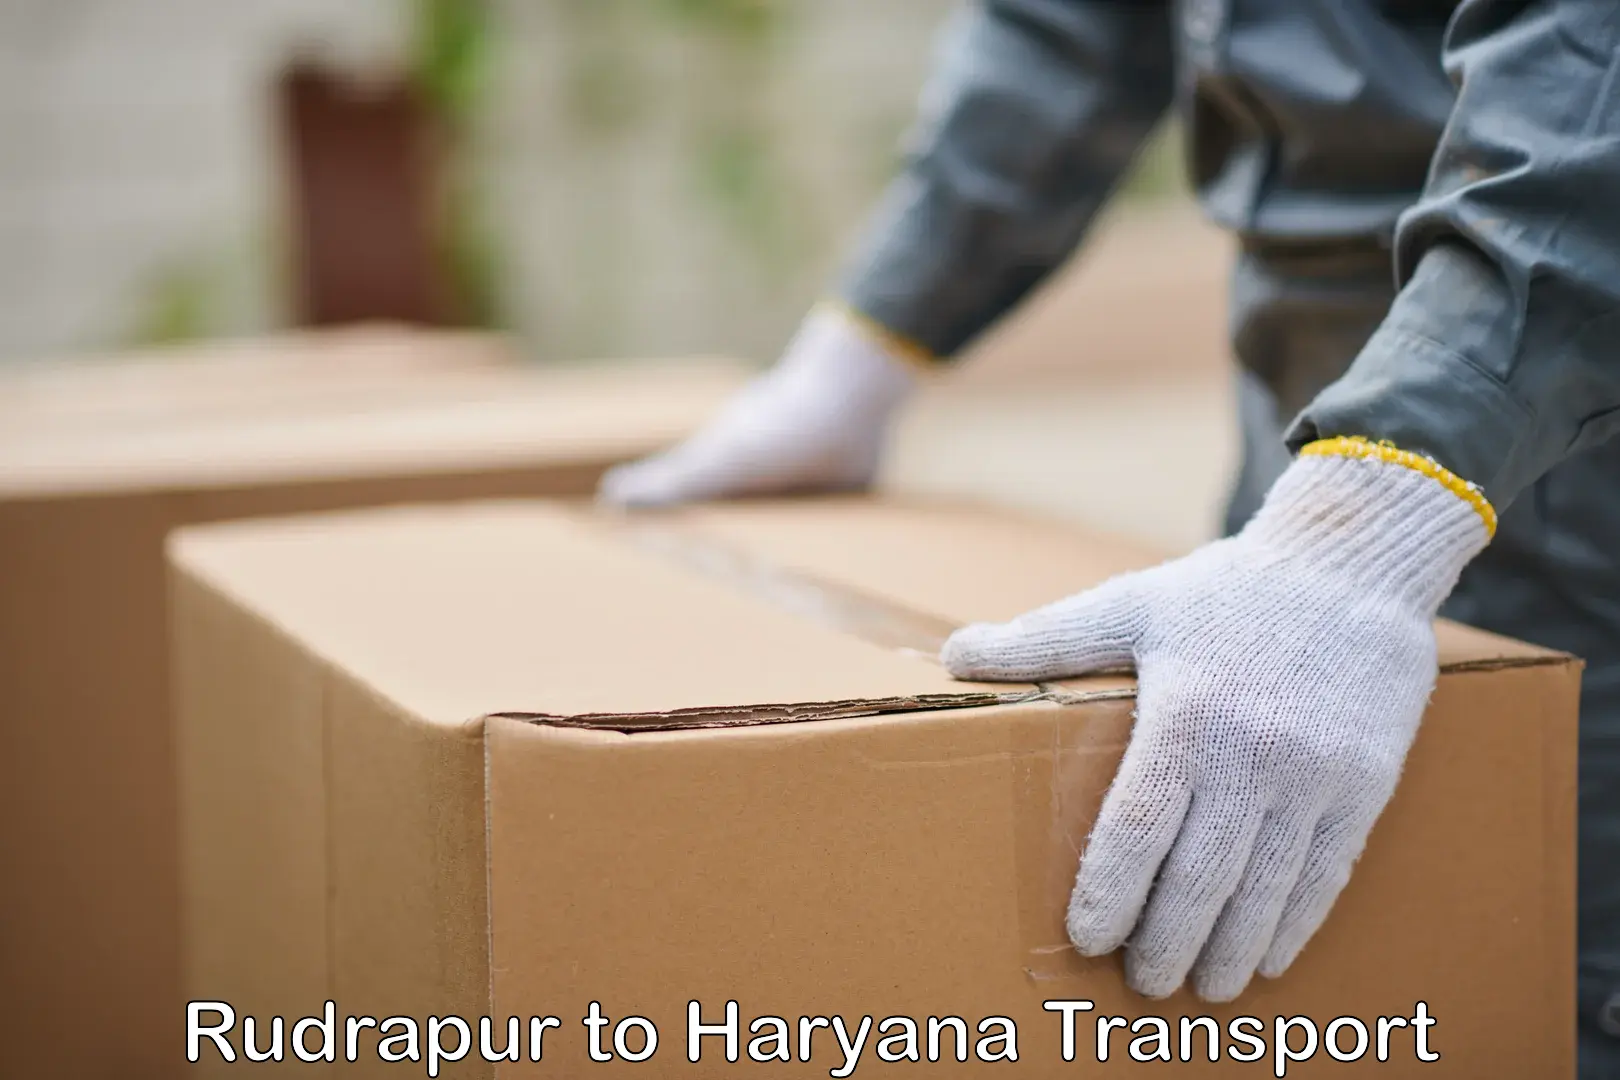 Air freight transport services Rudrapur to NCR Haryana